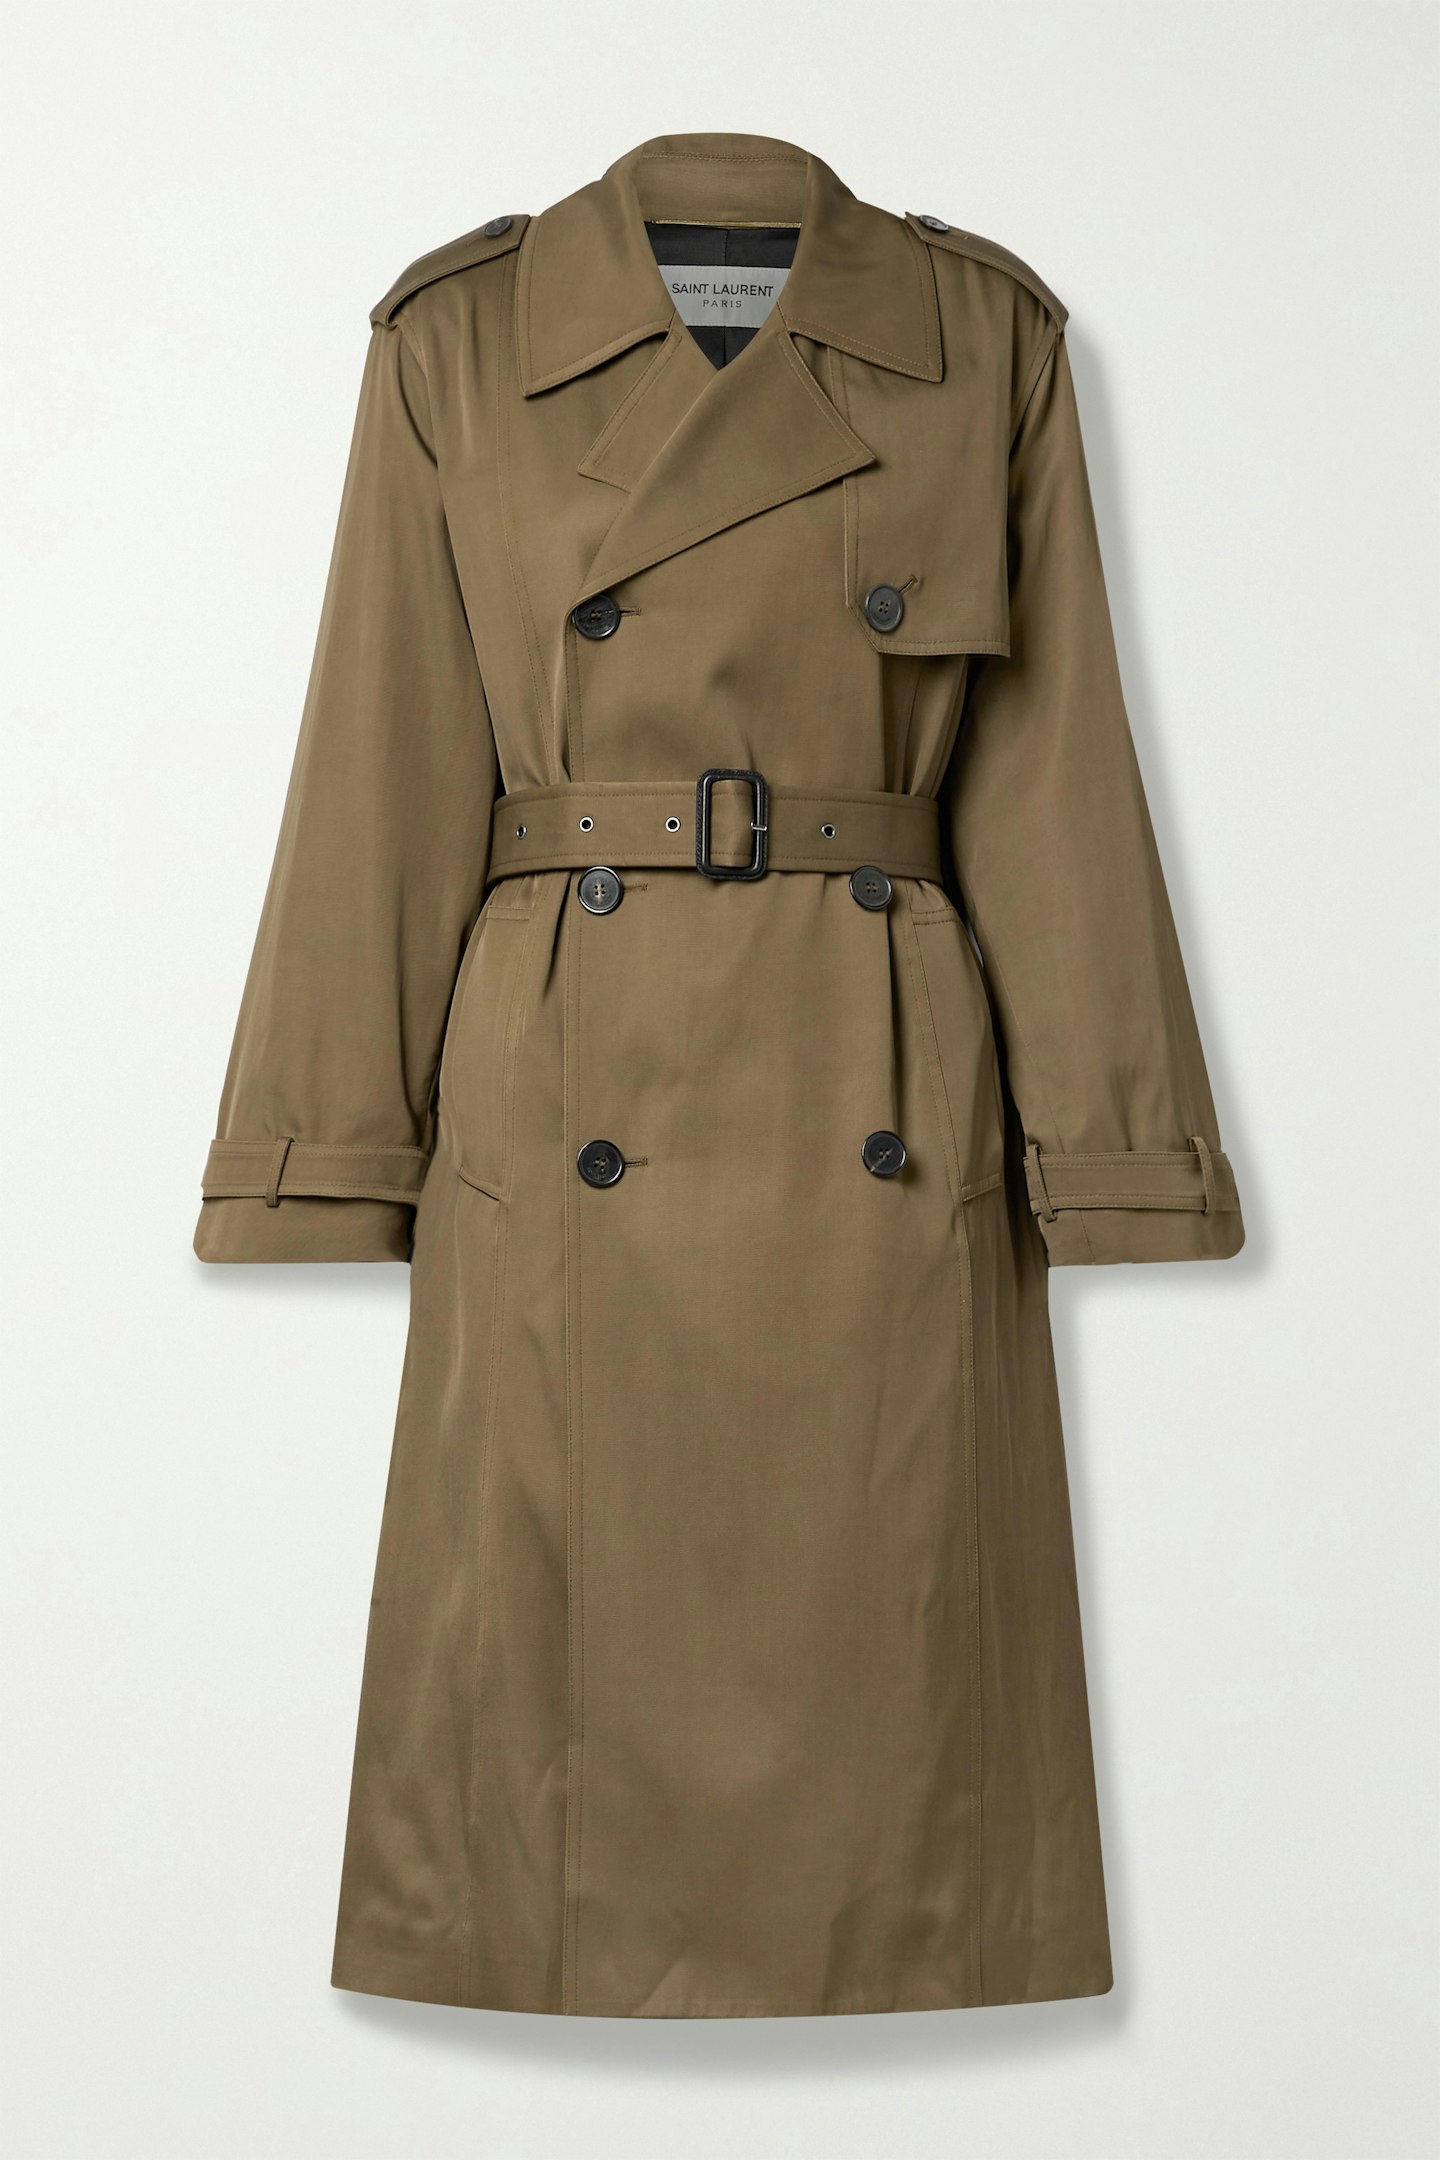 best trench coats for women Saint Laurent, Garbadine Double Breasted Trench Coat, £2,080